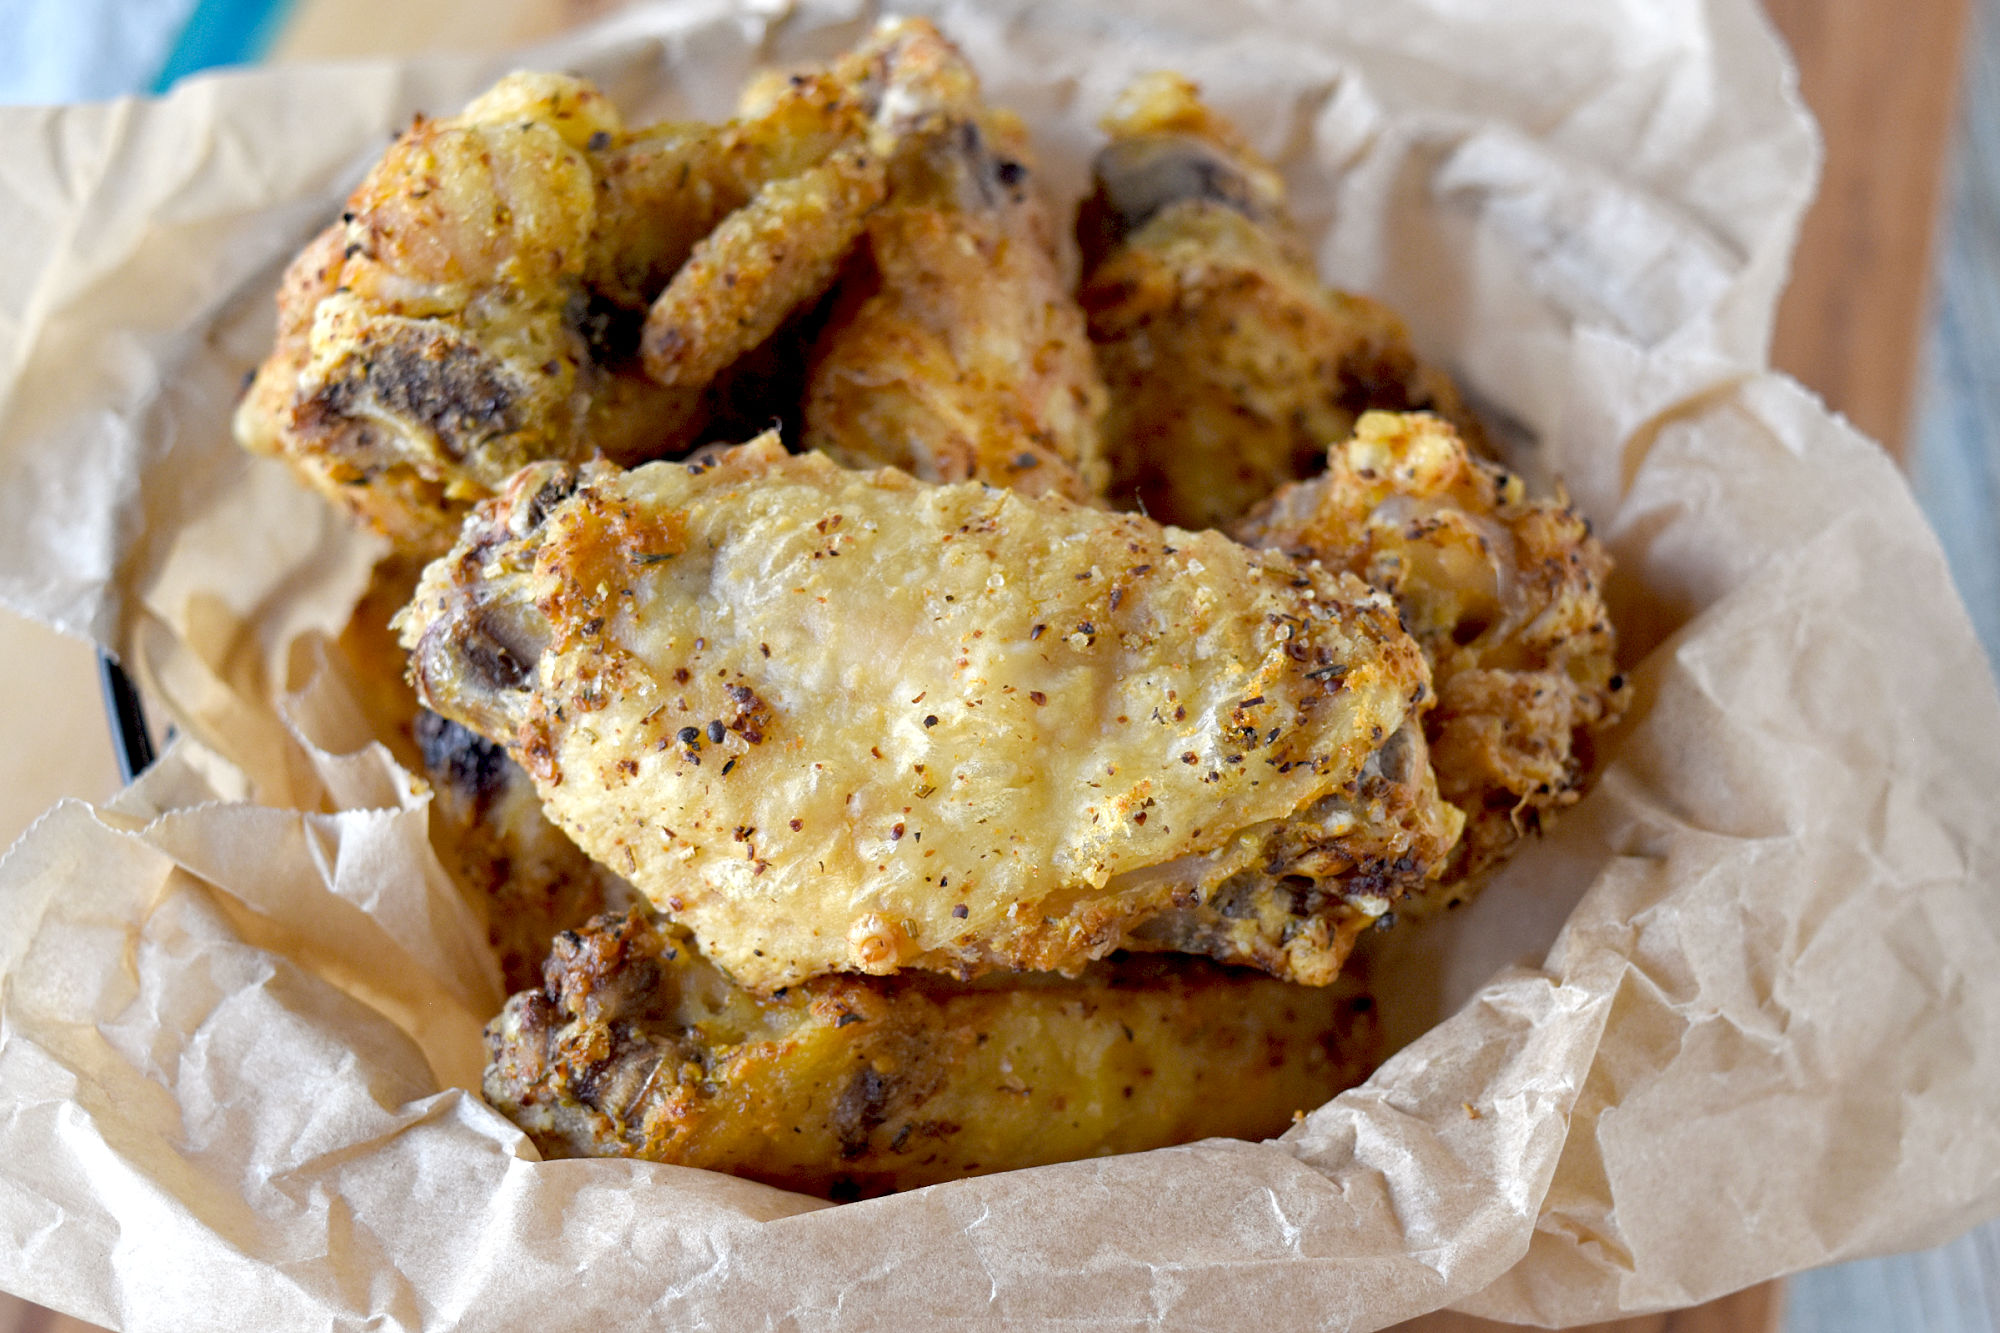 These are the Crispest Air Fryer Chicken Wings I’ve ever made. They have a crunchy outside and a juicy, tender inside. An easy and delicious snack for game day! #OurFamilyTable #airfryer #crispywings #crispyairfryerwings #chickenwings